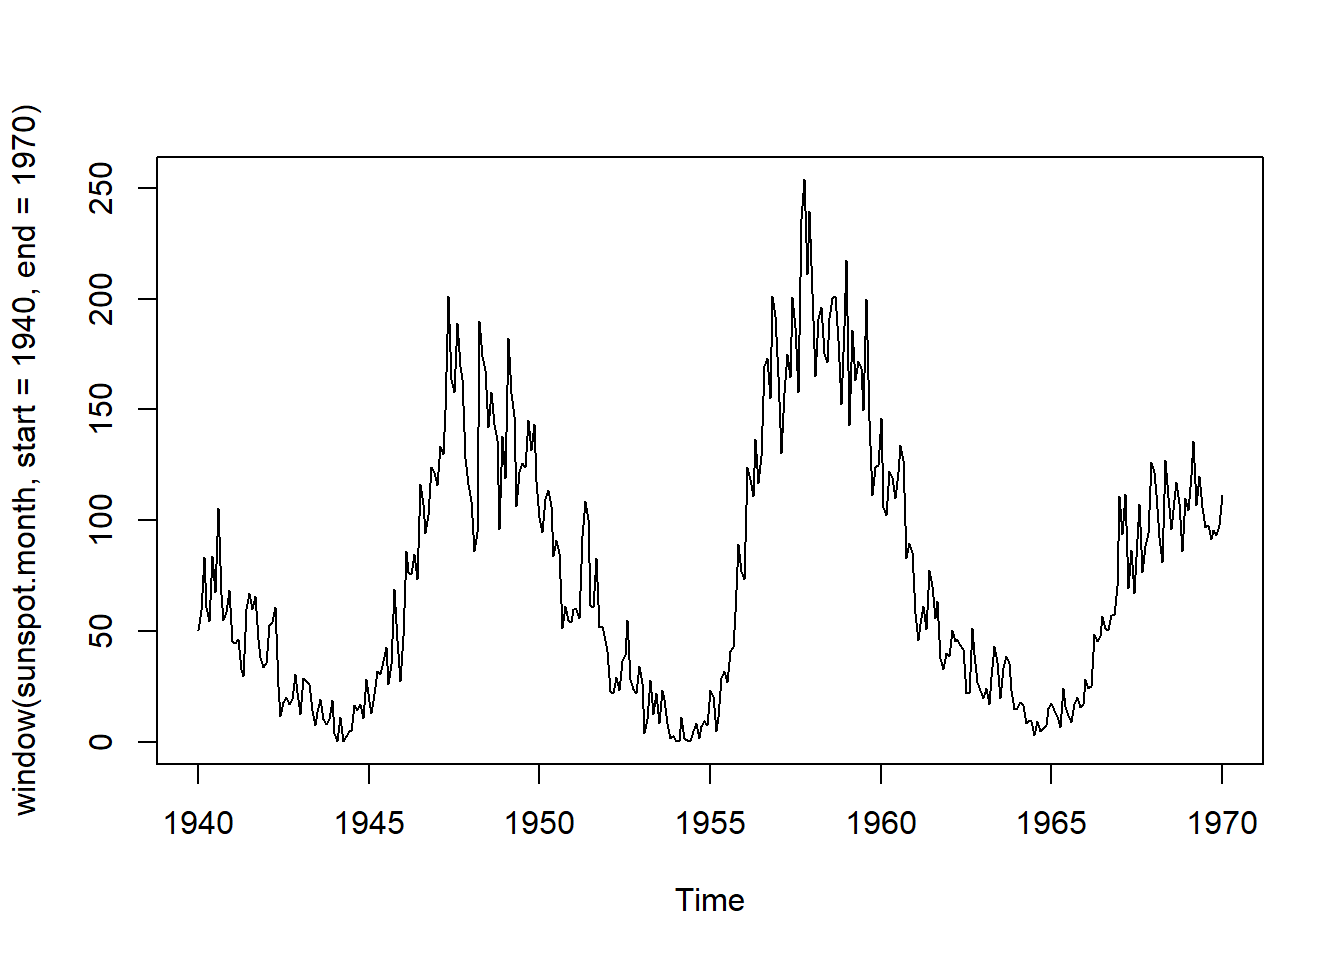 stl decomposition of Marbles water level time series